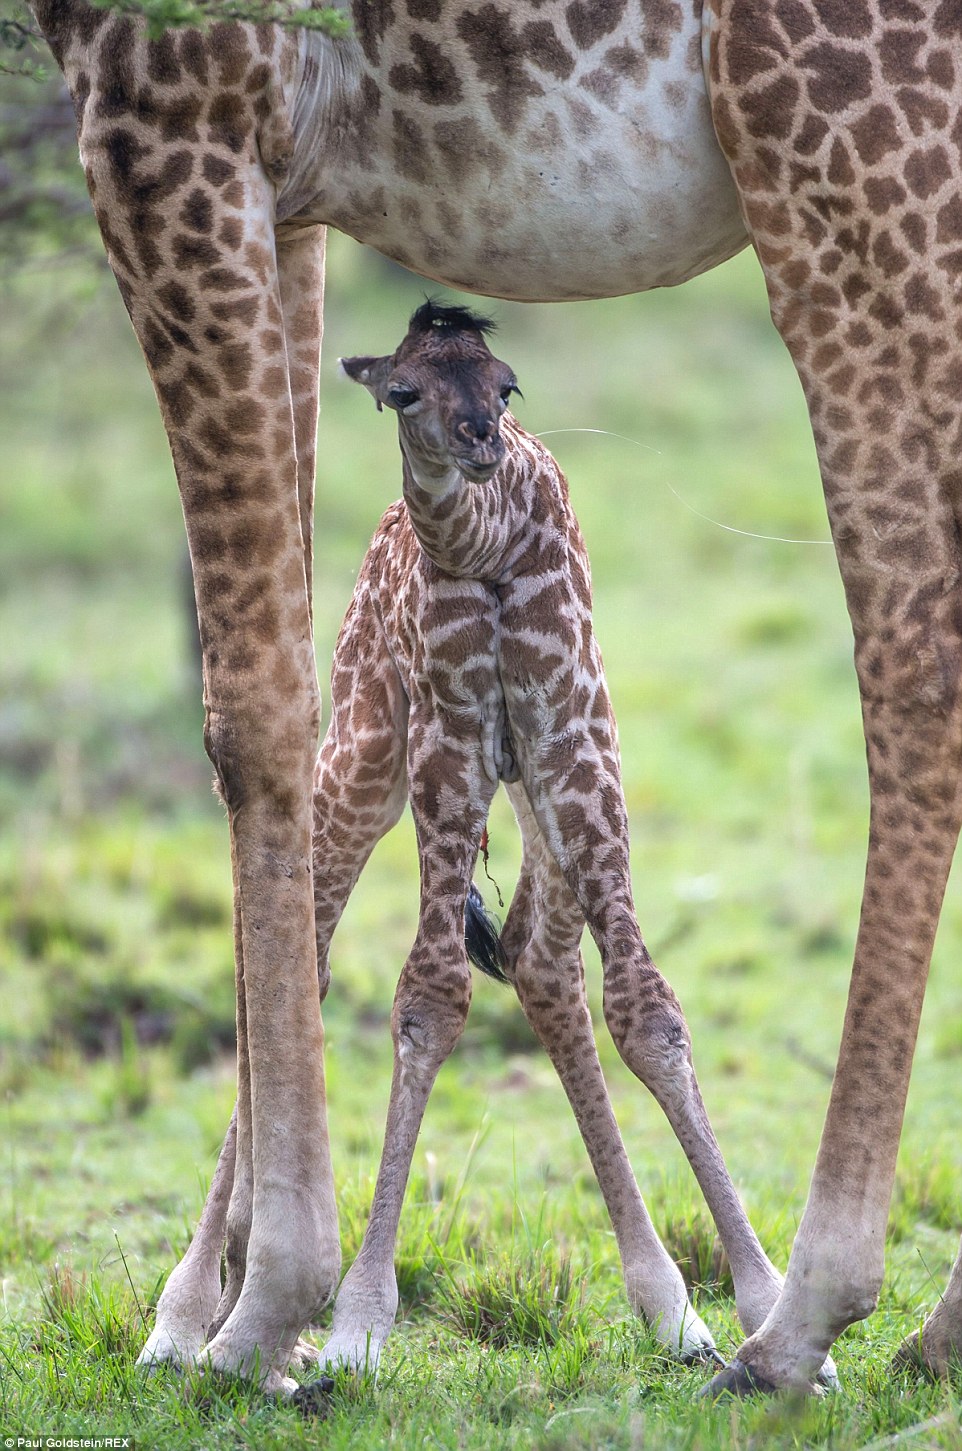 Mr Goldstein's photo captures a newborn giraffe taking its first steps 15 minutes after it was born